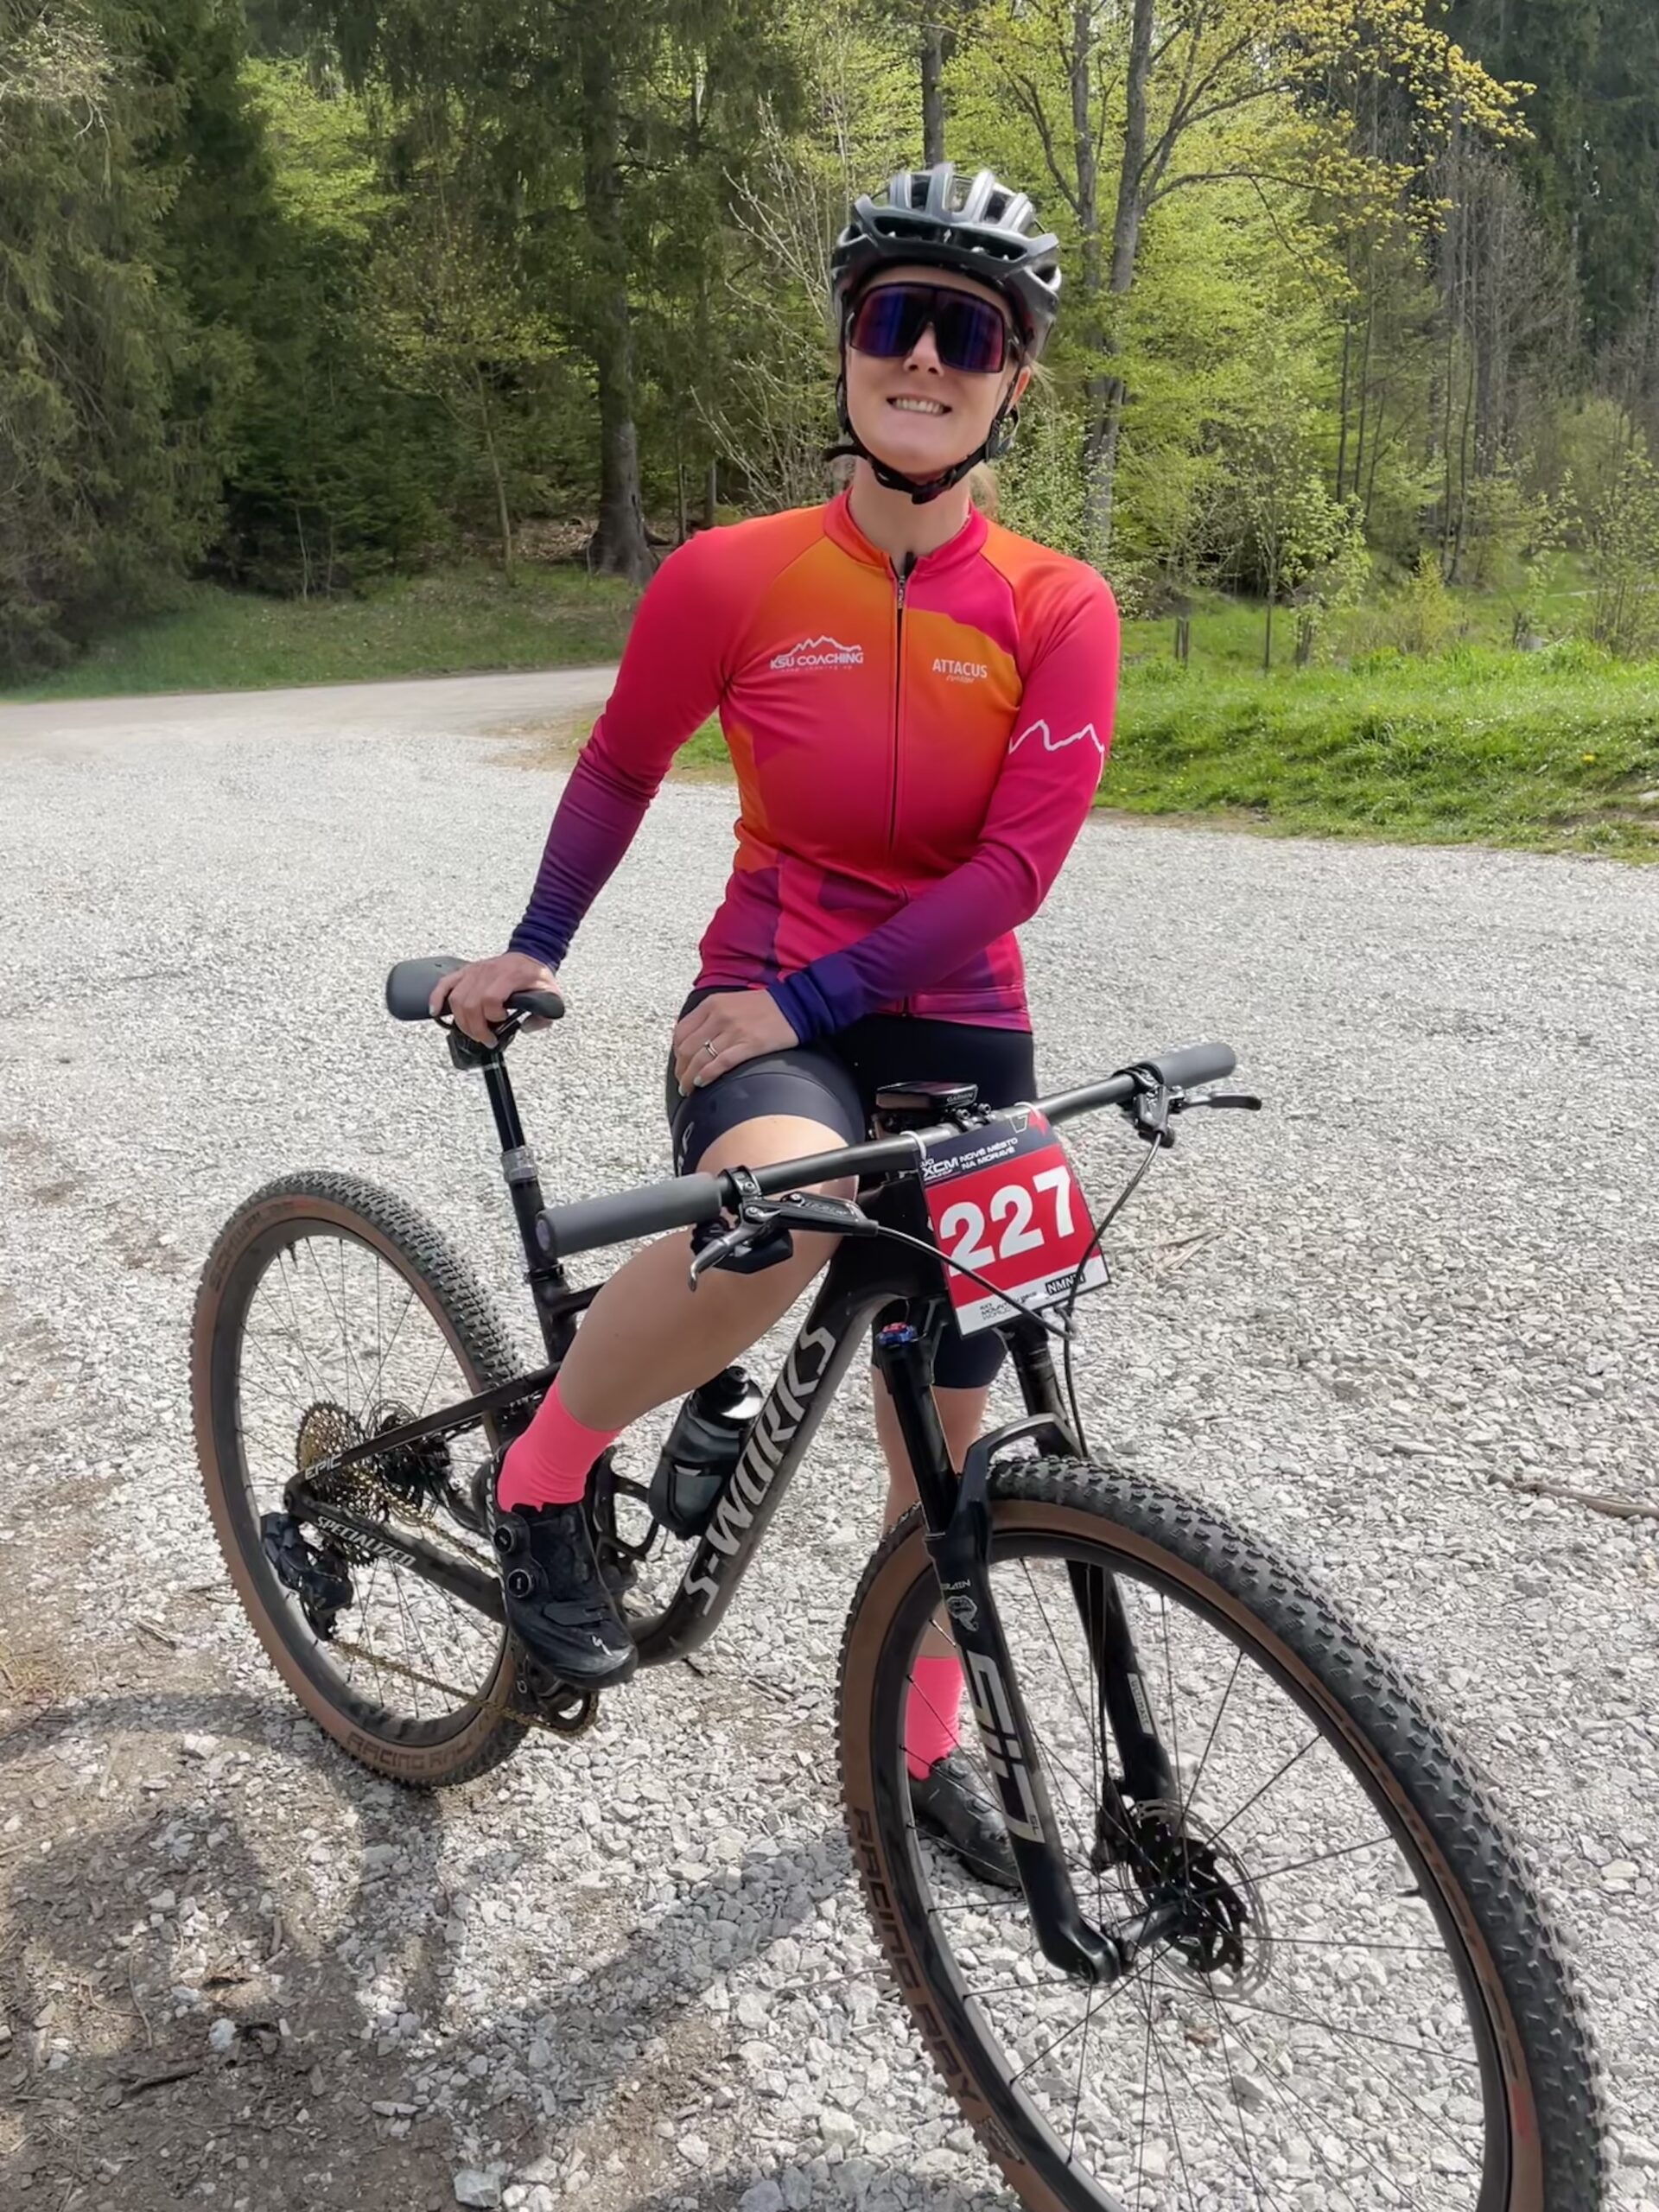 Smiling female mtb cyclist in a pink and orange jersey posing with her mountain bike, number 227, on a gravel path surrounded by lush green forest